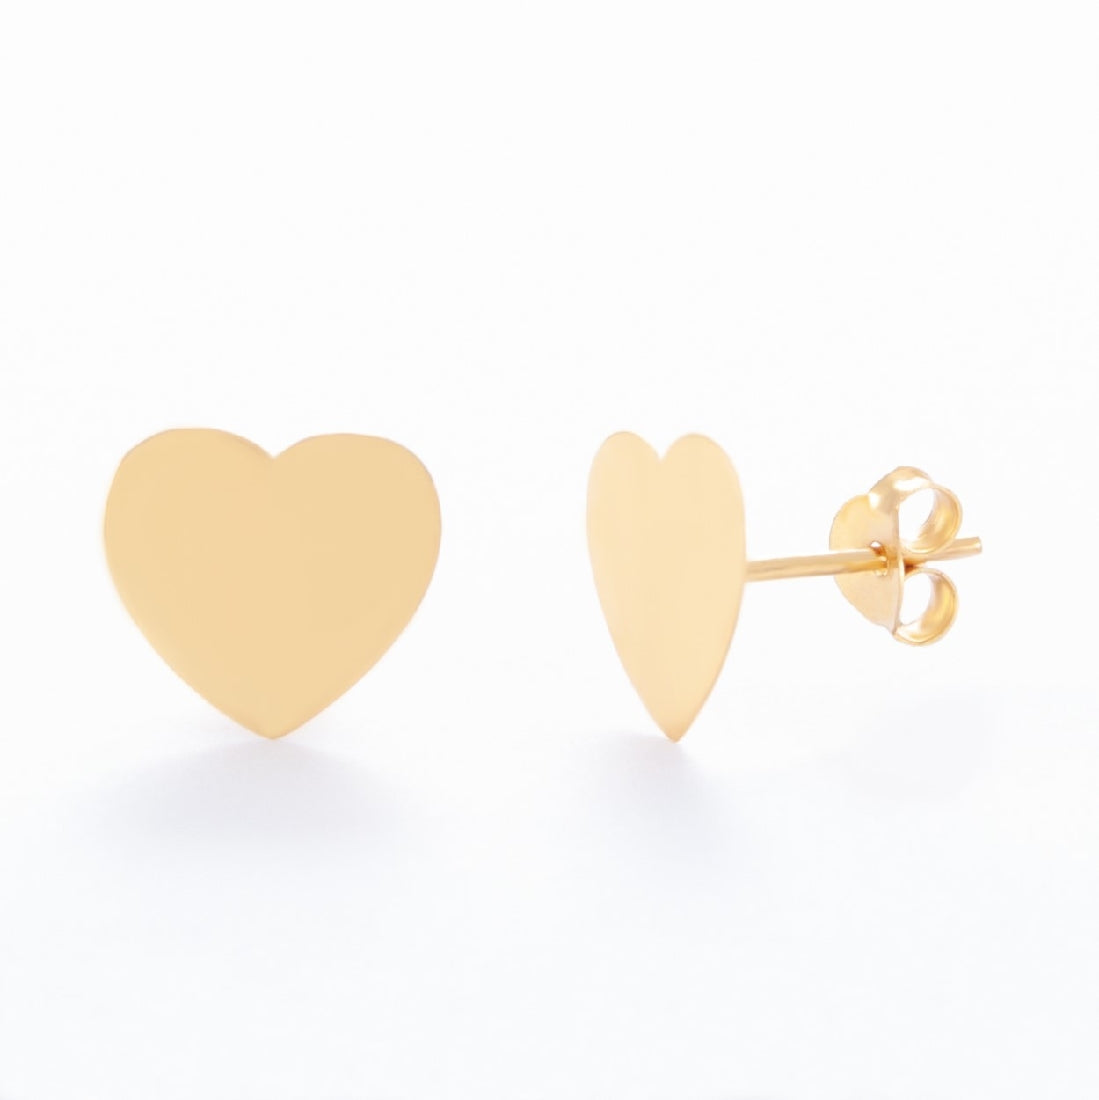 Who's Charlie 10mm Sterling Silver Gold Heart Earring